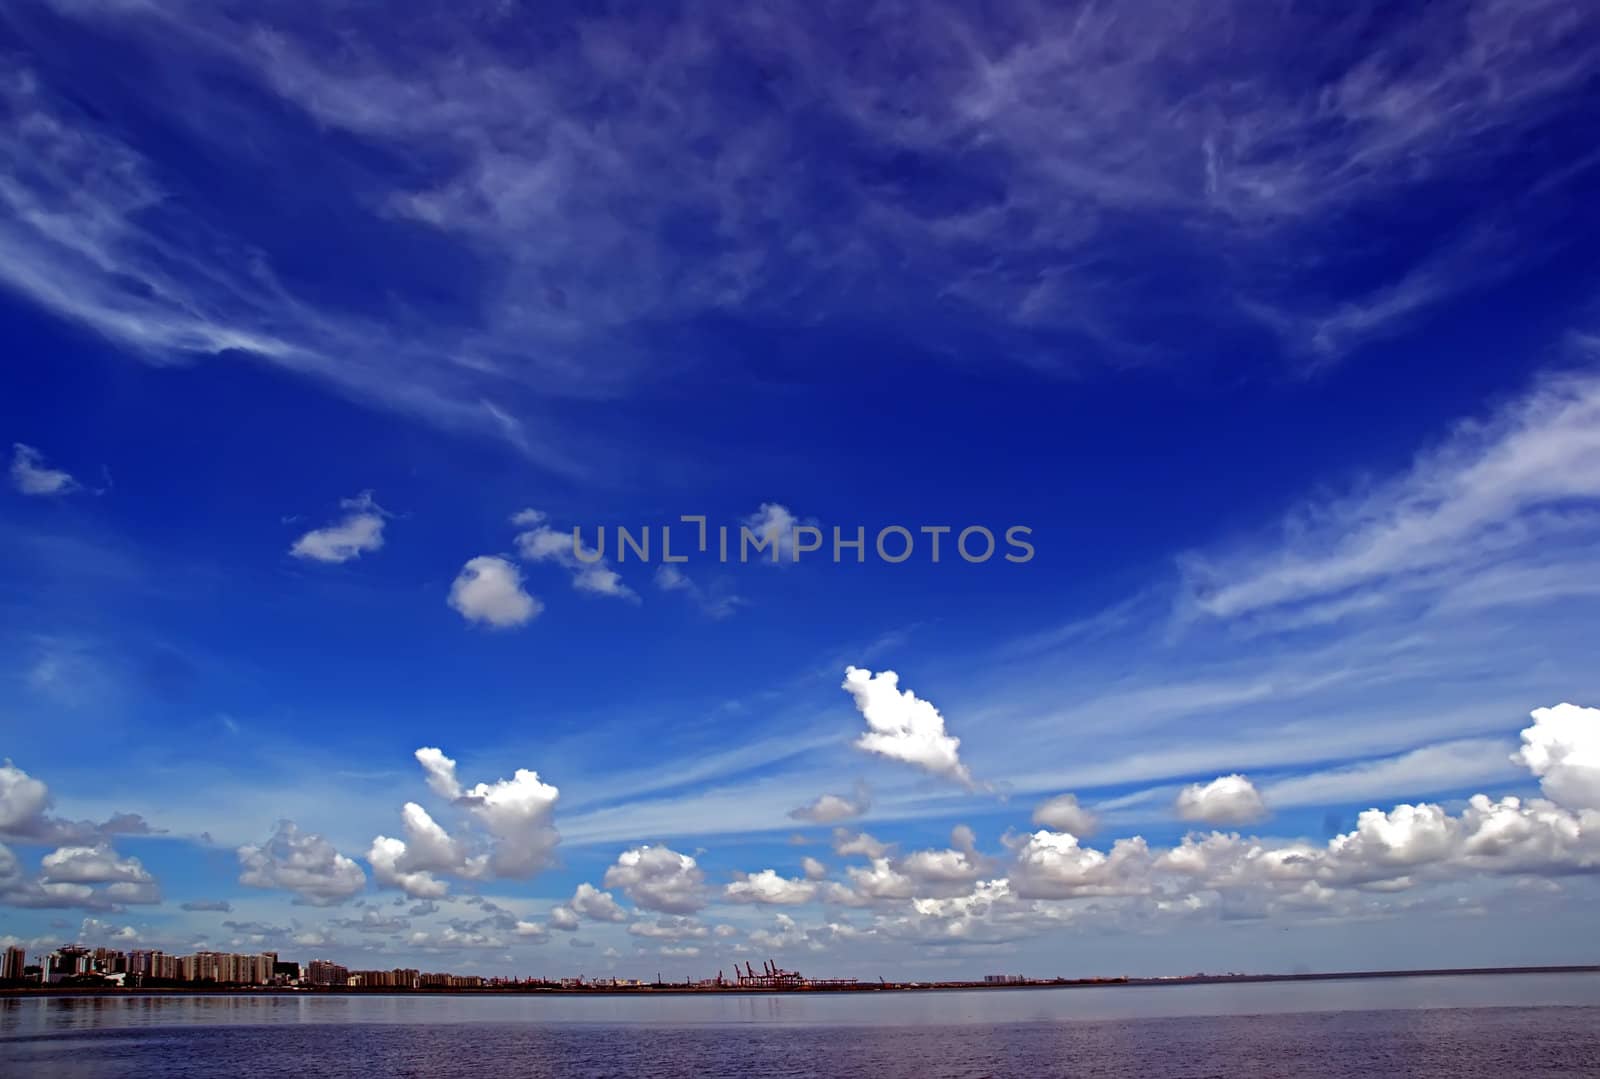 Under the blue sky overlooking the coastal city landscape by xfdly5